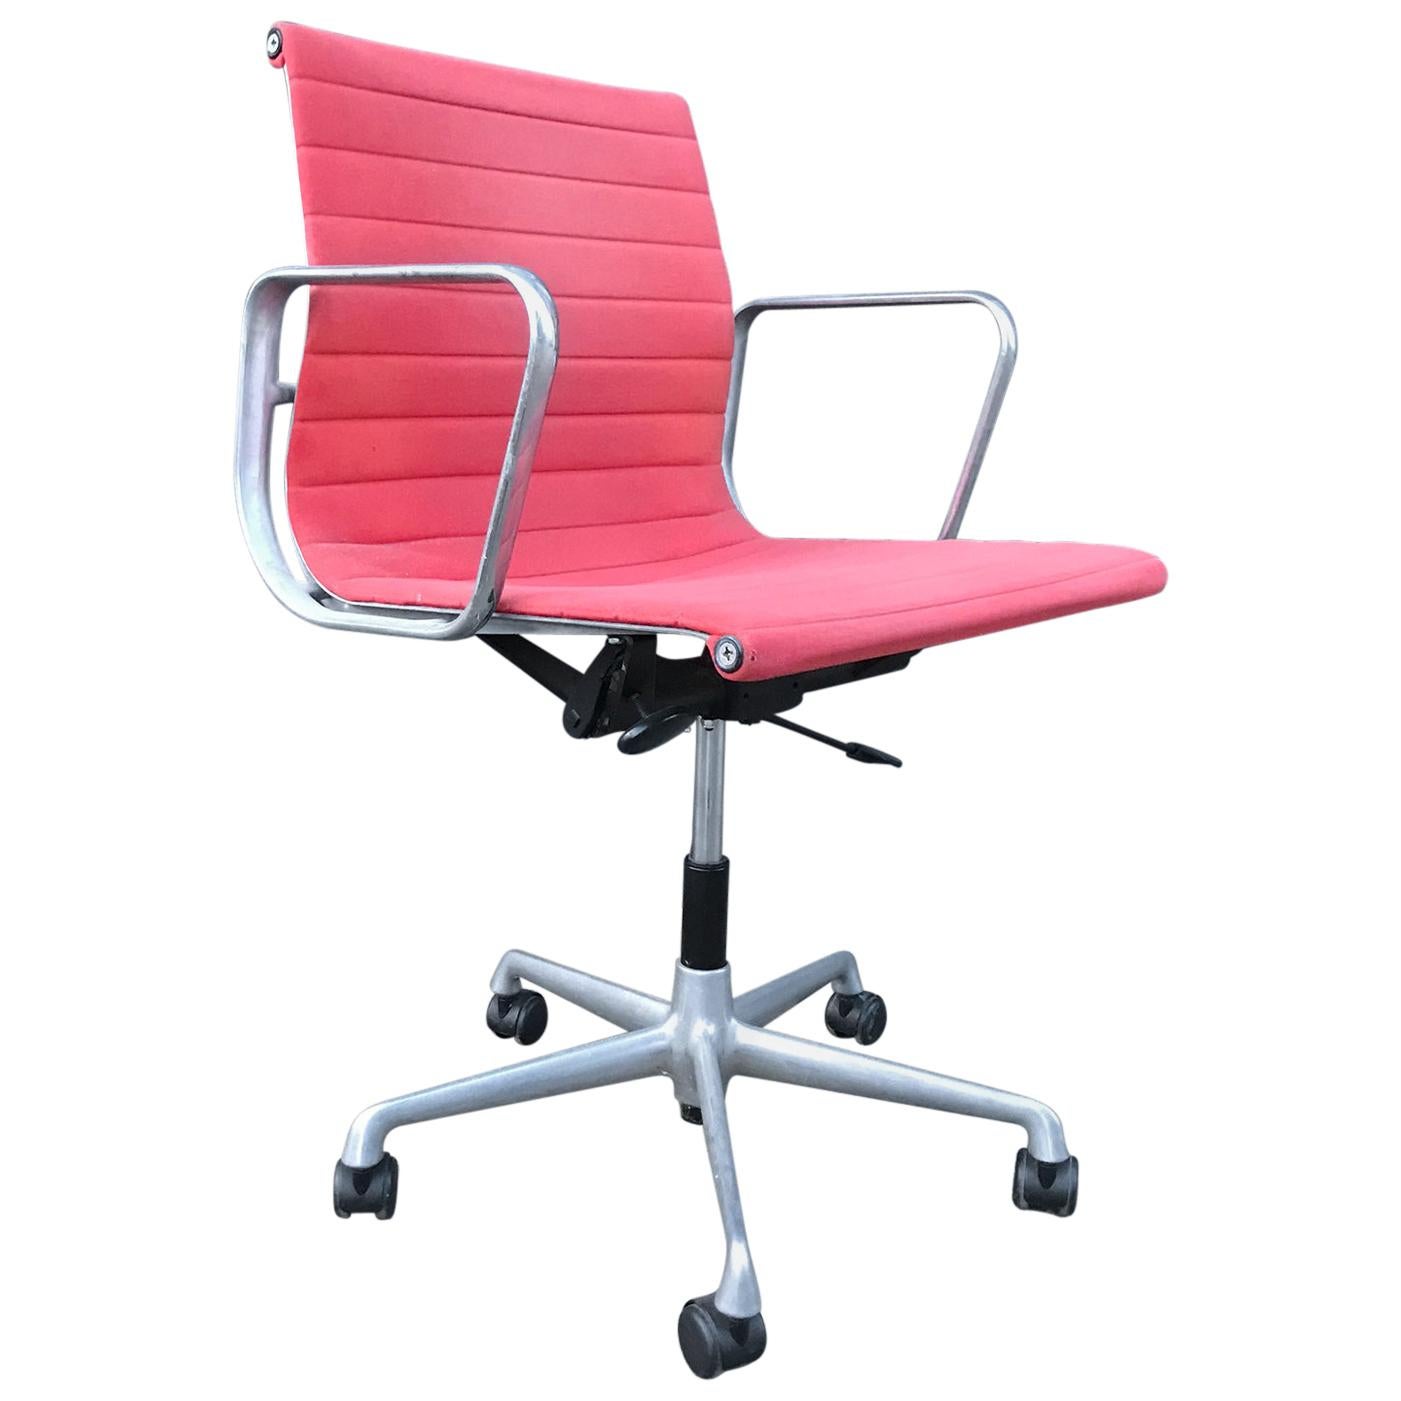 1958, Ray and Charles Eames Red Adjustable Tilt Office Chair with Five Wheels